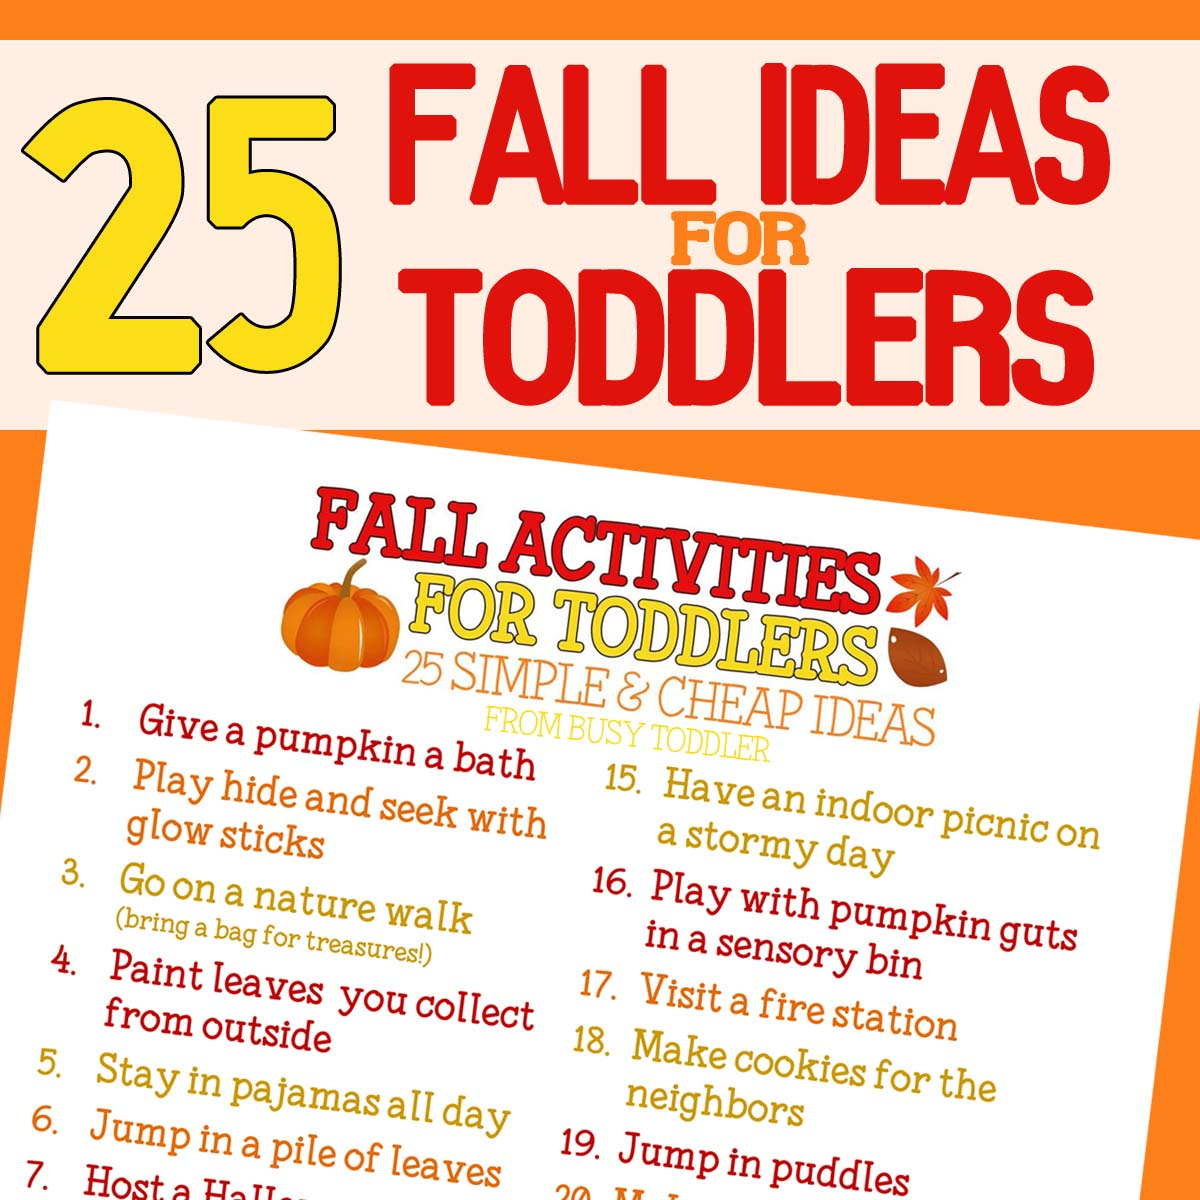 Fall Bucket List For Toddlers - Busy Toddler